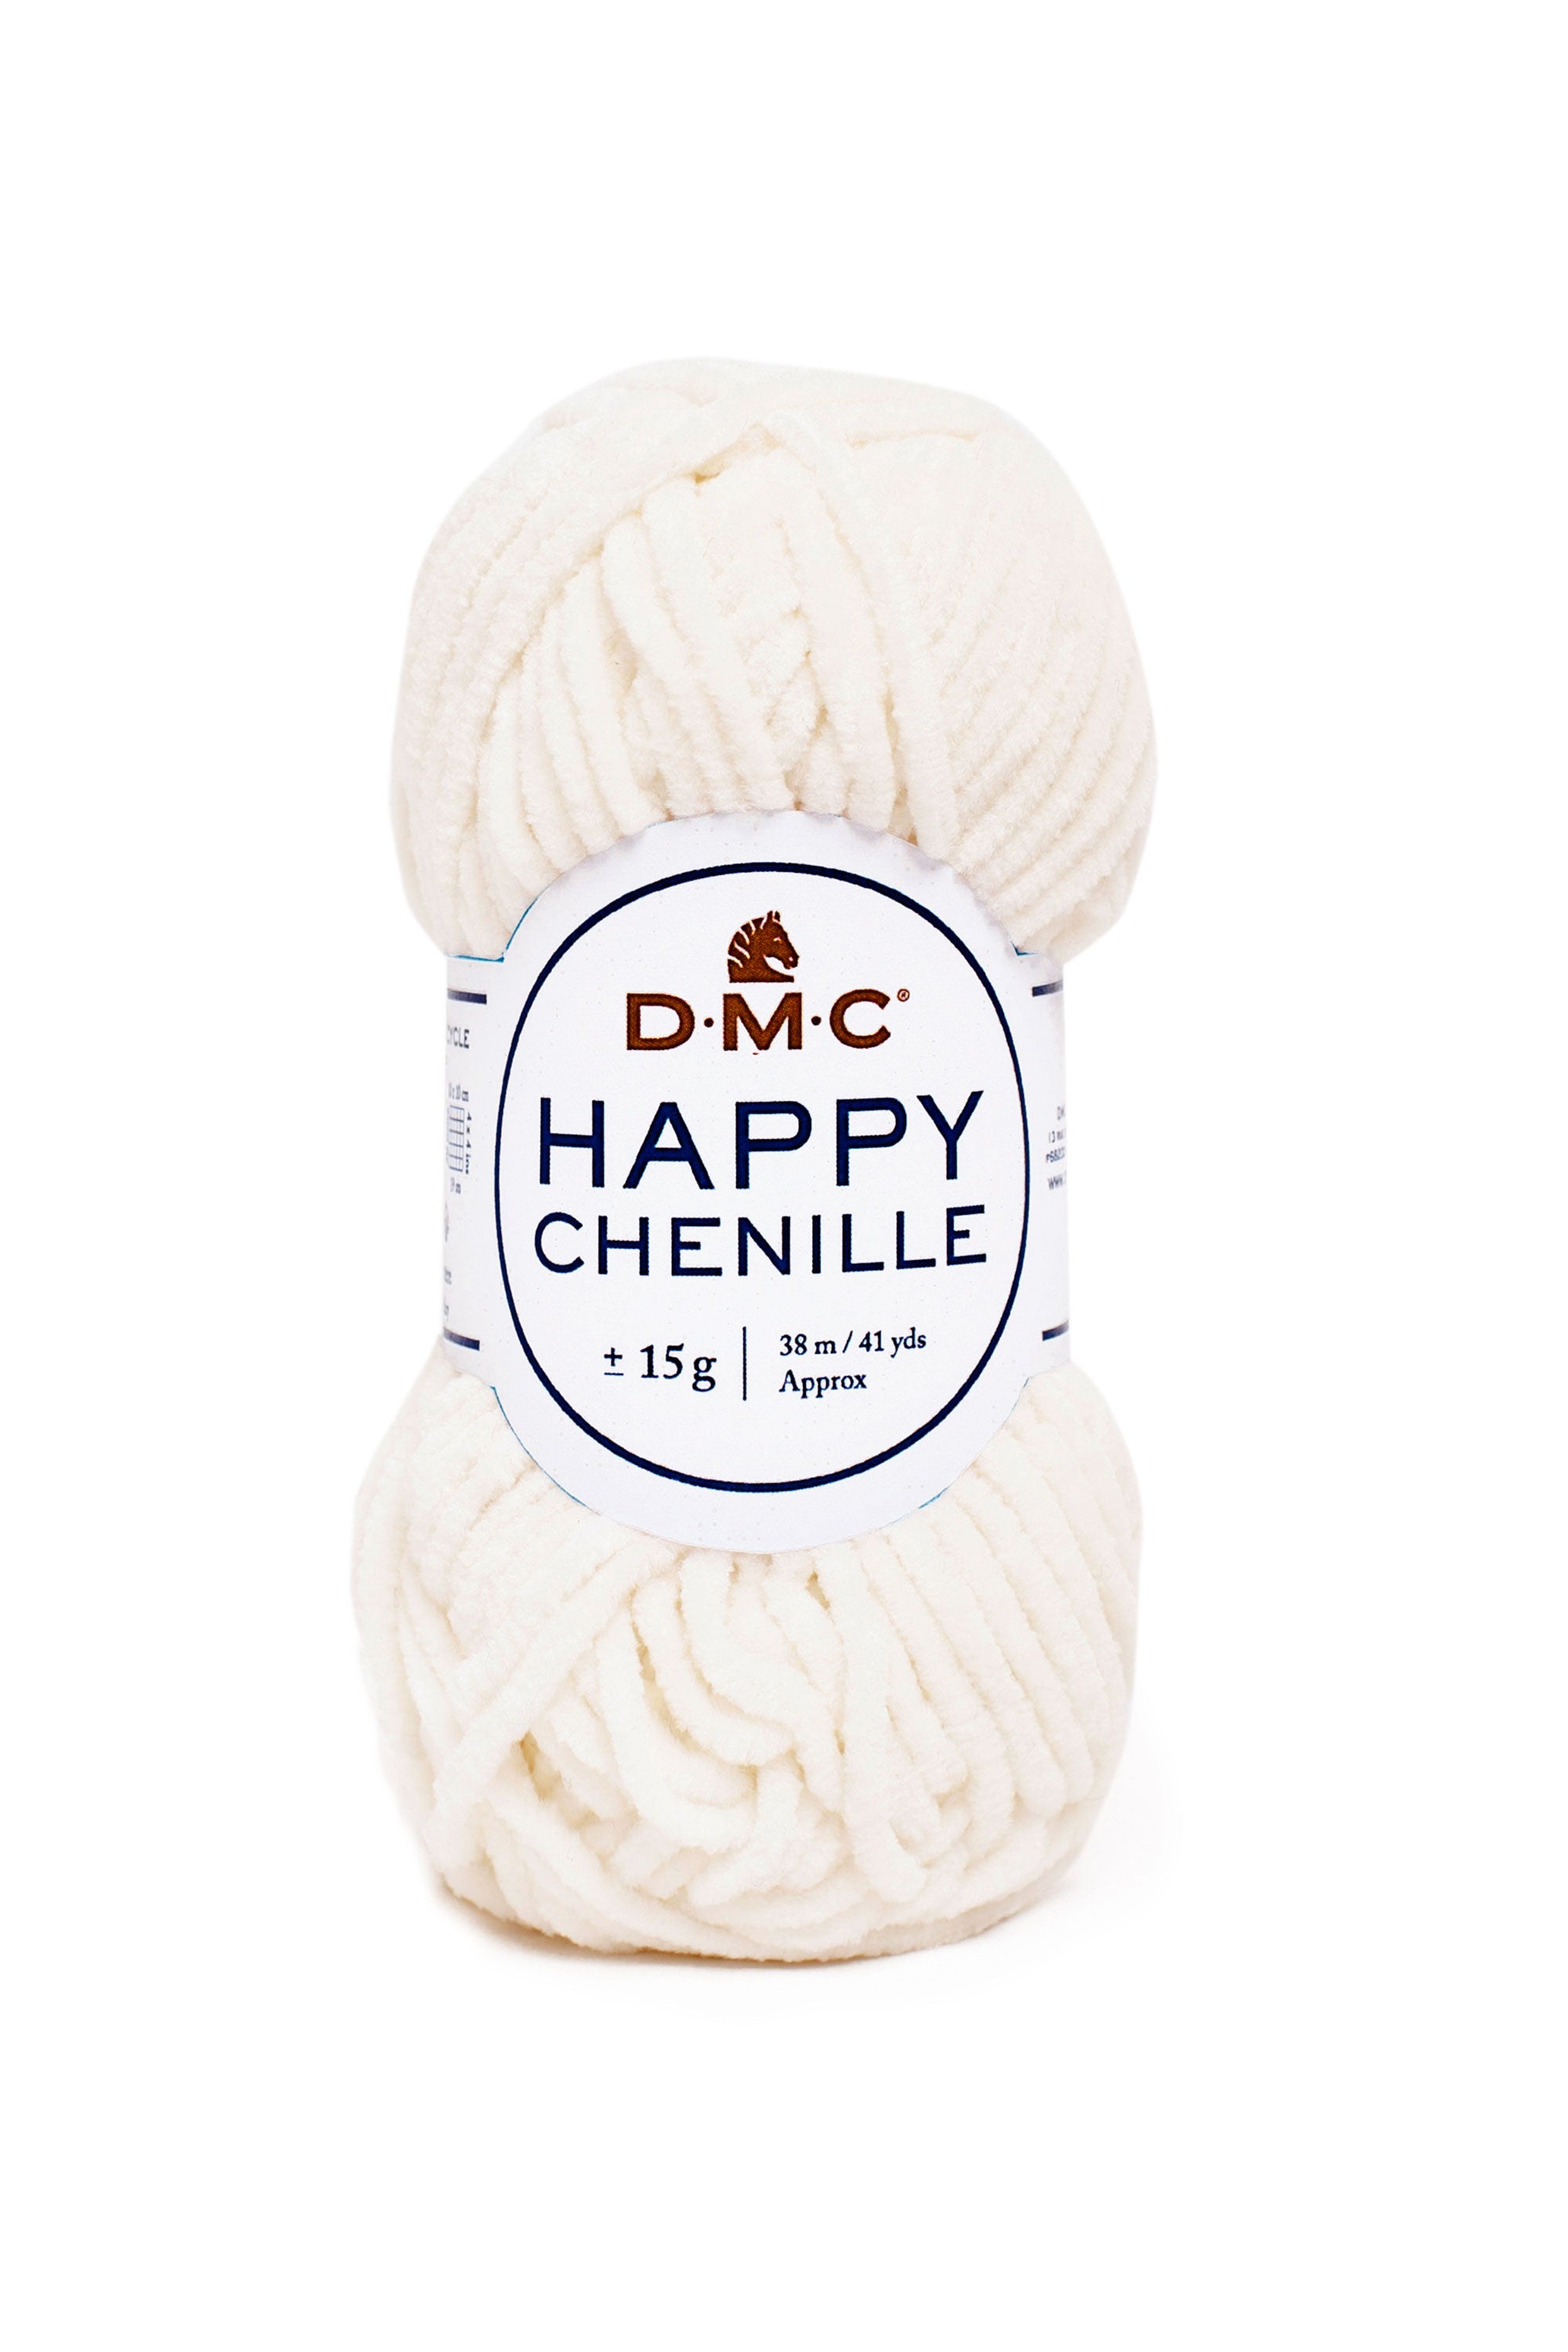 DMC Happy Chenille - Velvet Yarn for Adorable Projects